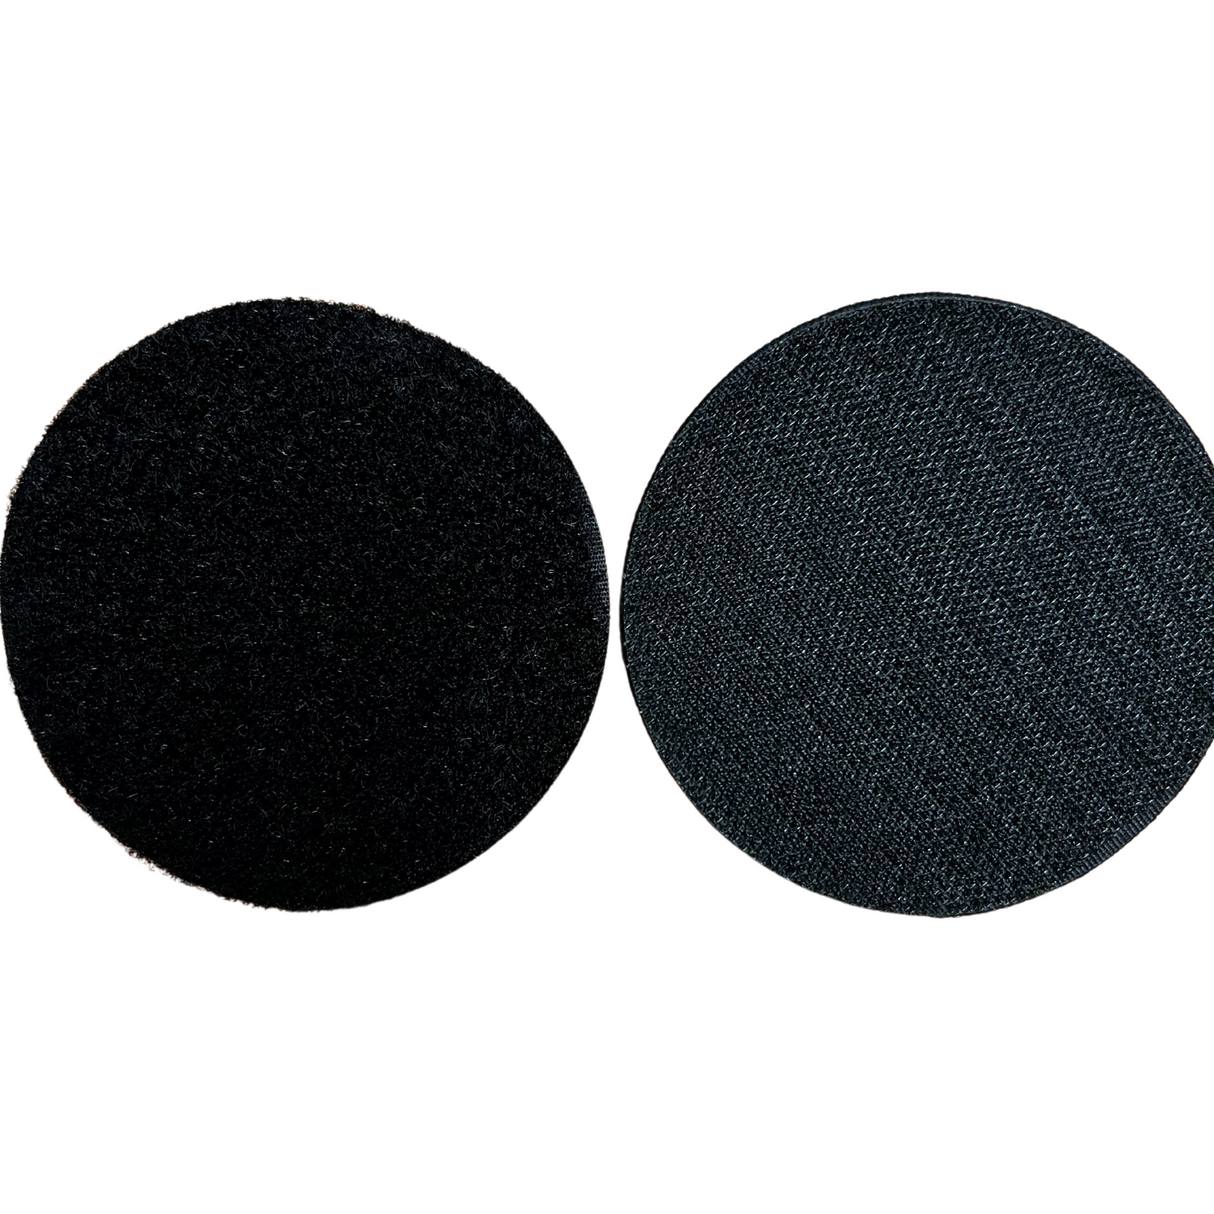 Ukraine Solidarity Patch Rubber Patch